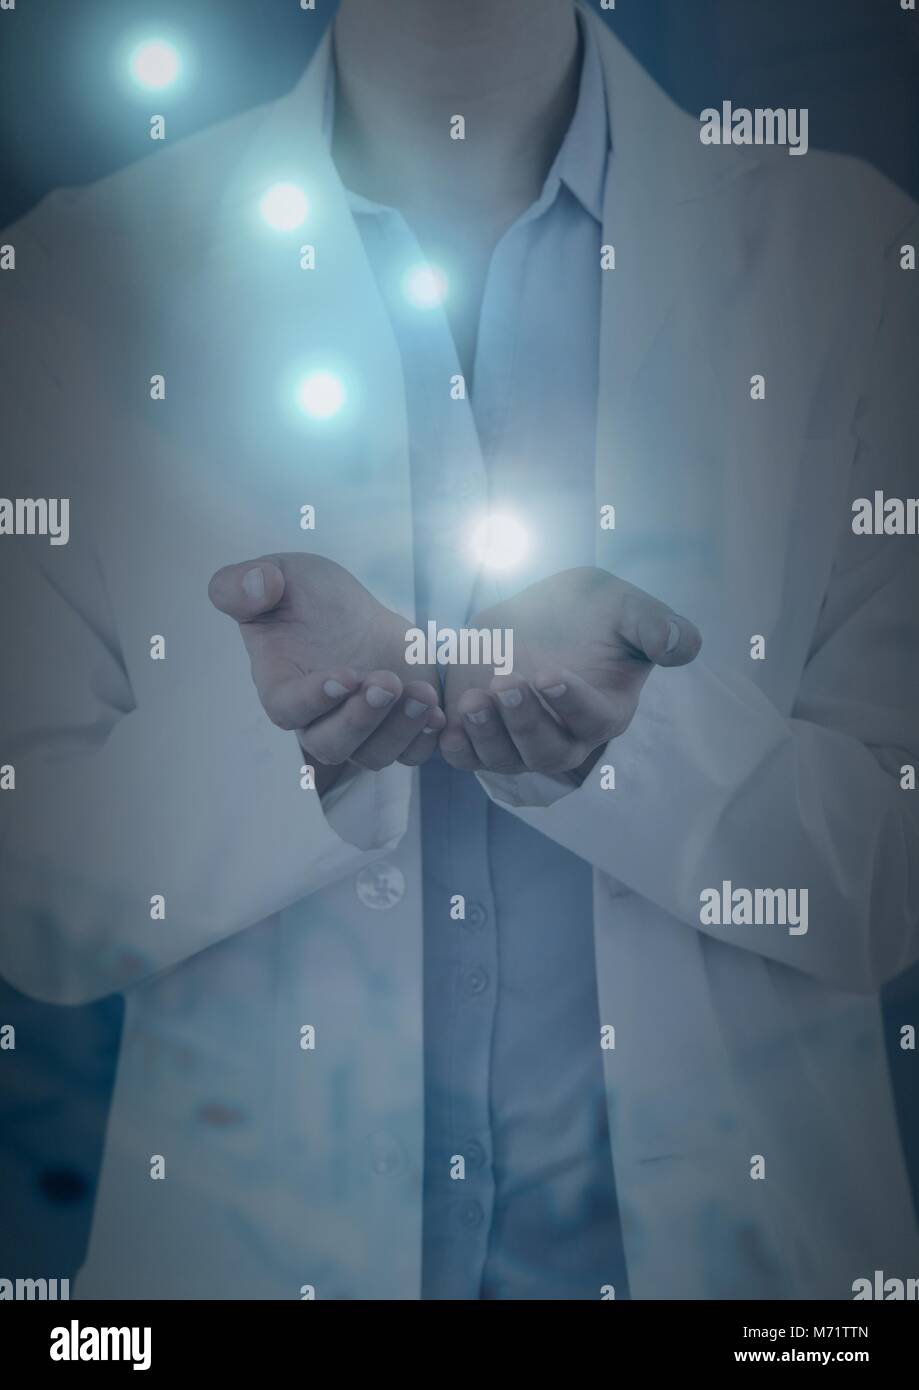 Doctor opening hands with glowing lights Stock Photo